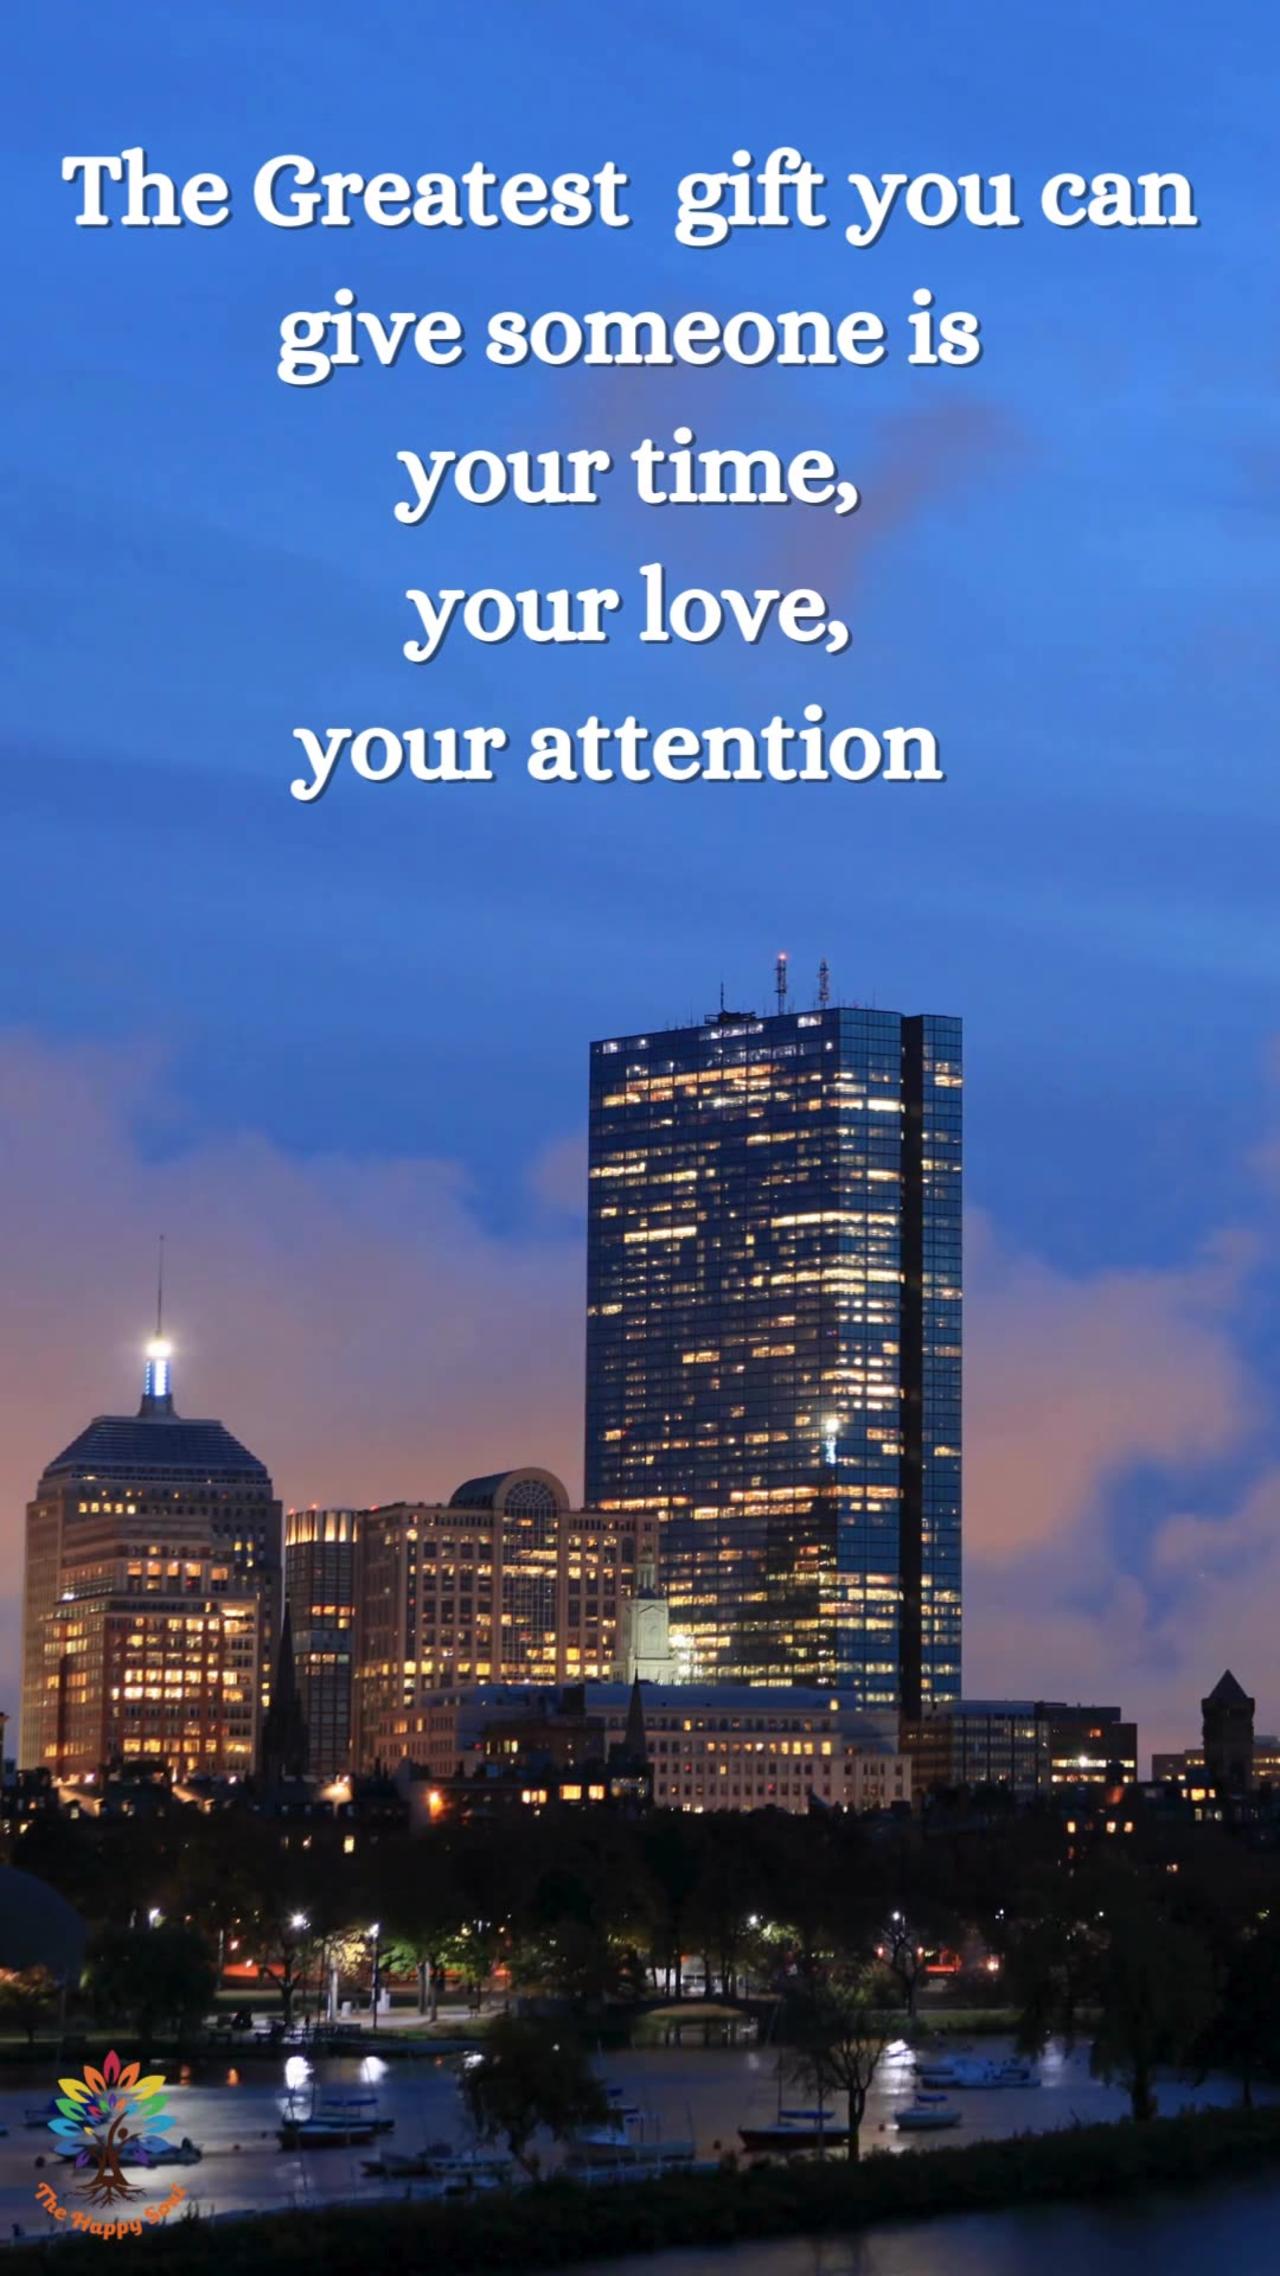 "The Greatest Gift: Time, Love, Attention #divinehealer #motivation #quotes #thehappysoul